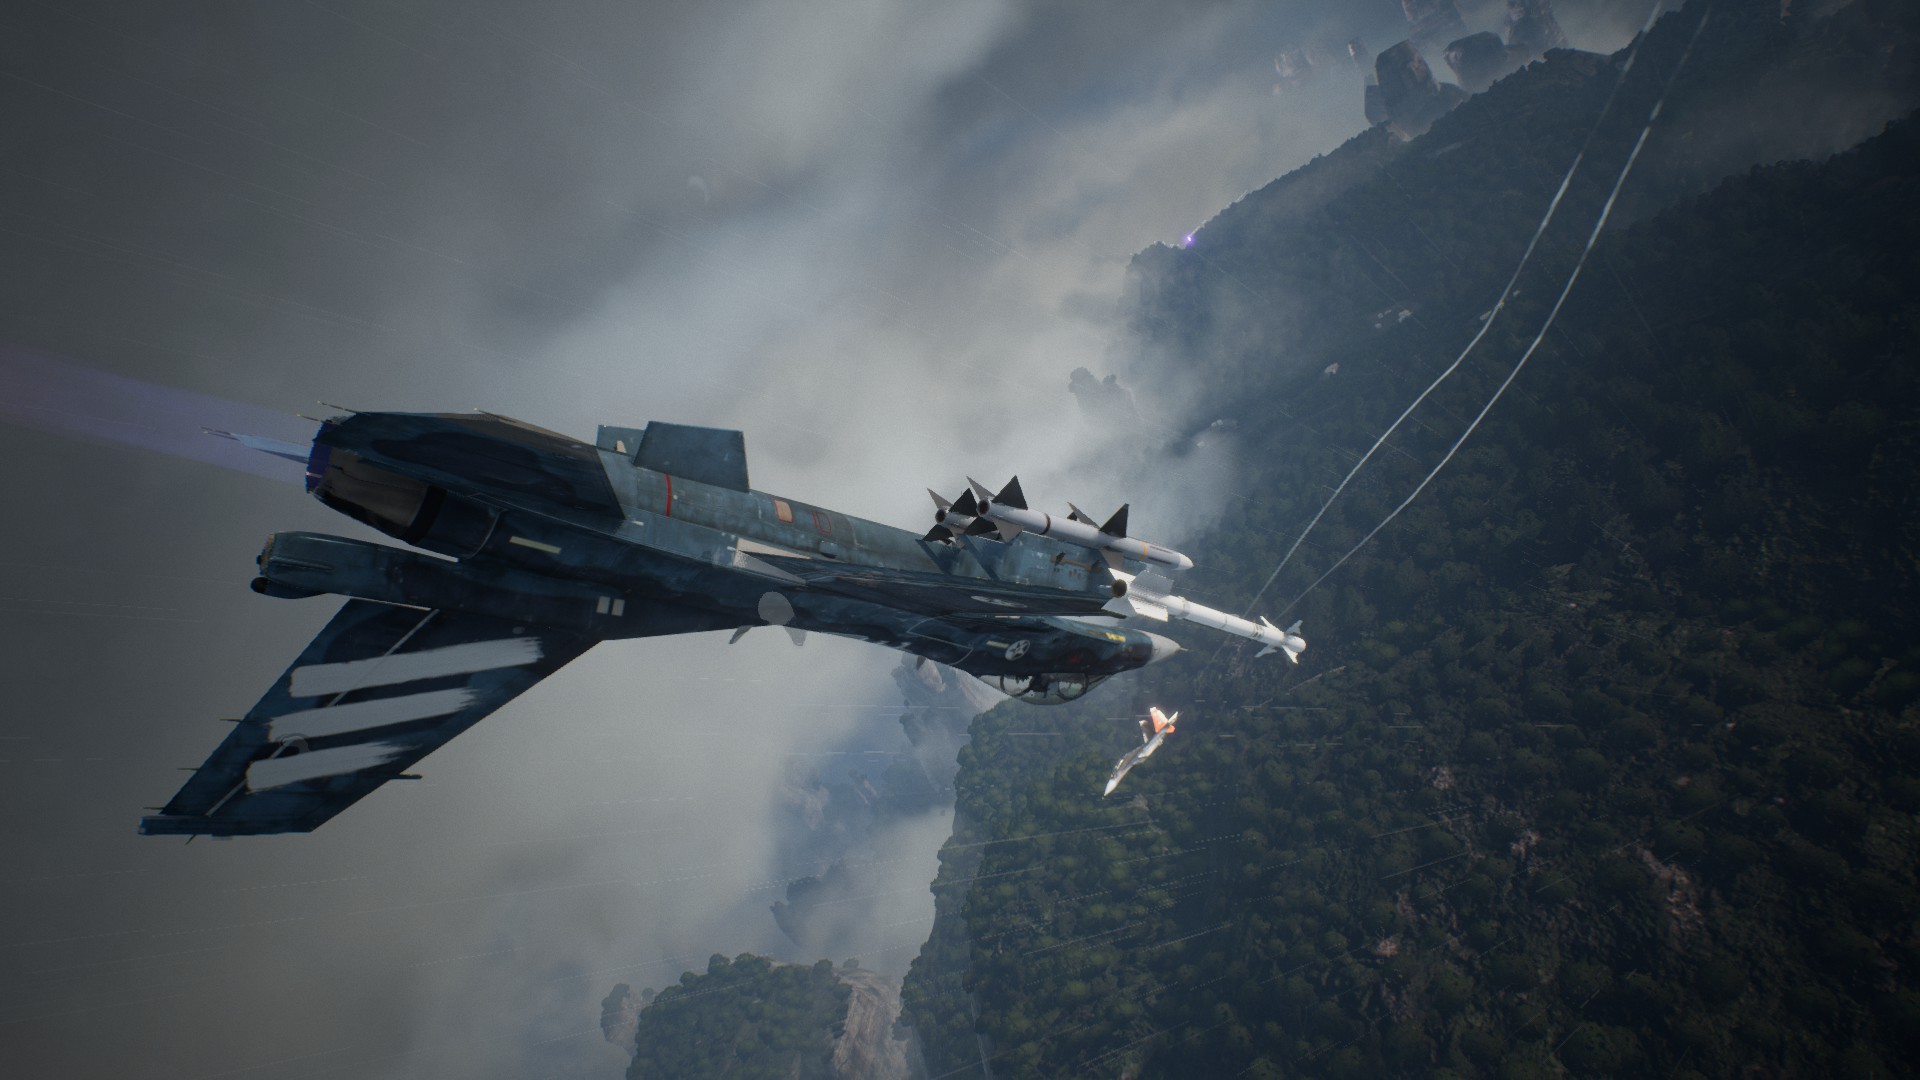 Ace Combat 7: Skies Unknown Missions 06 and 07 Shown in Video